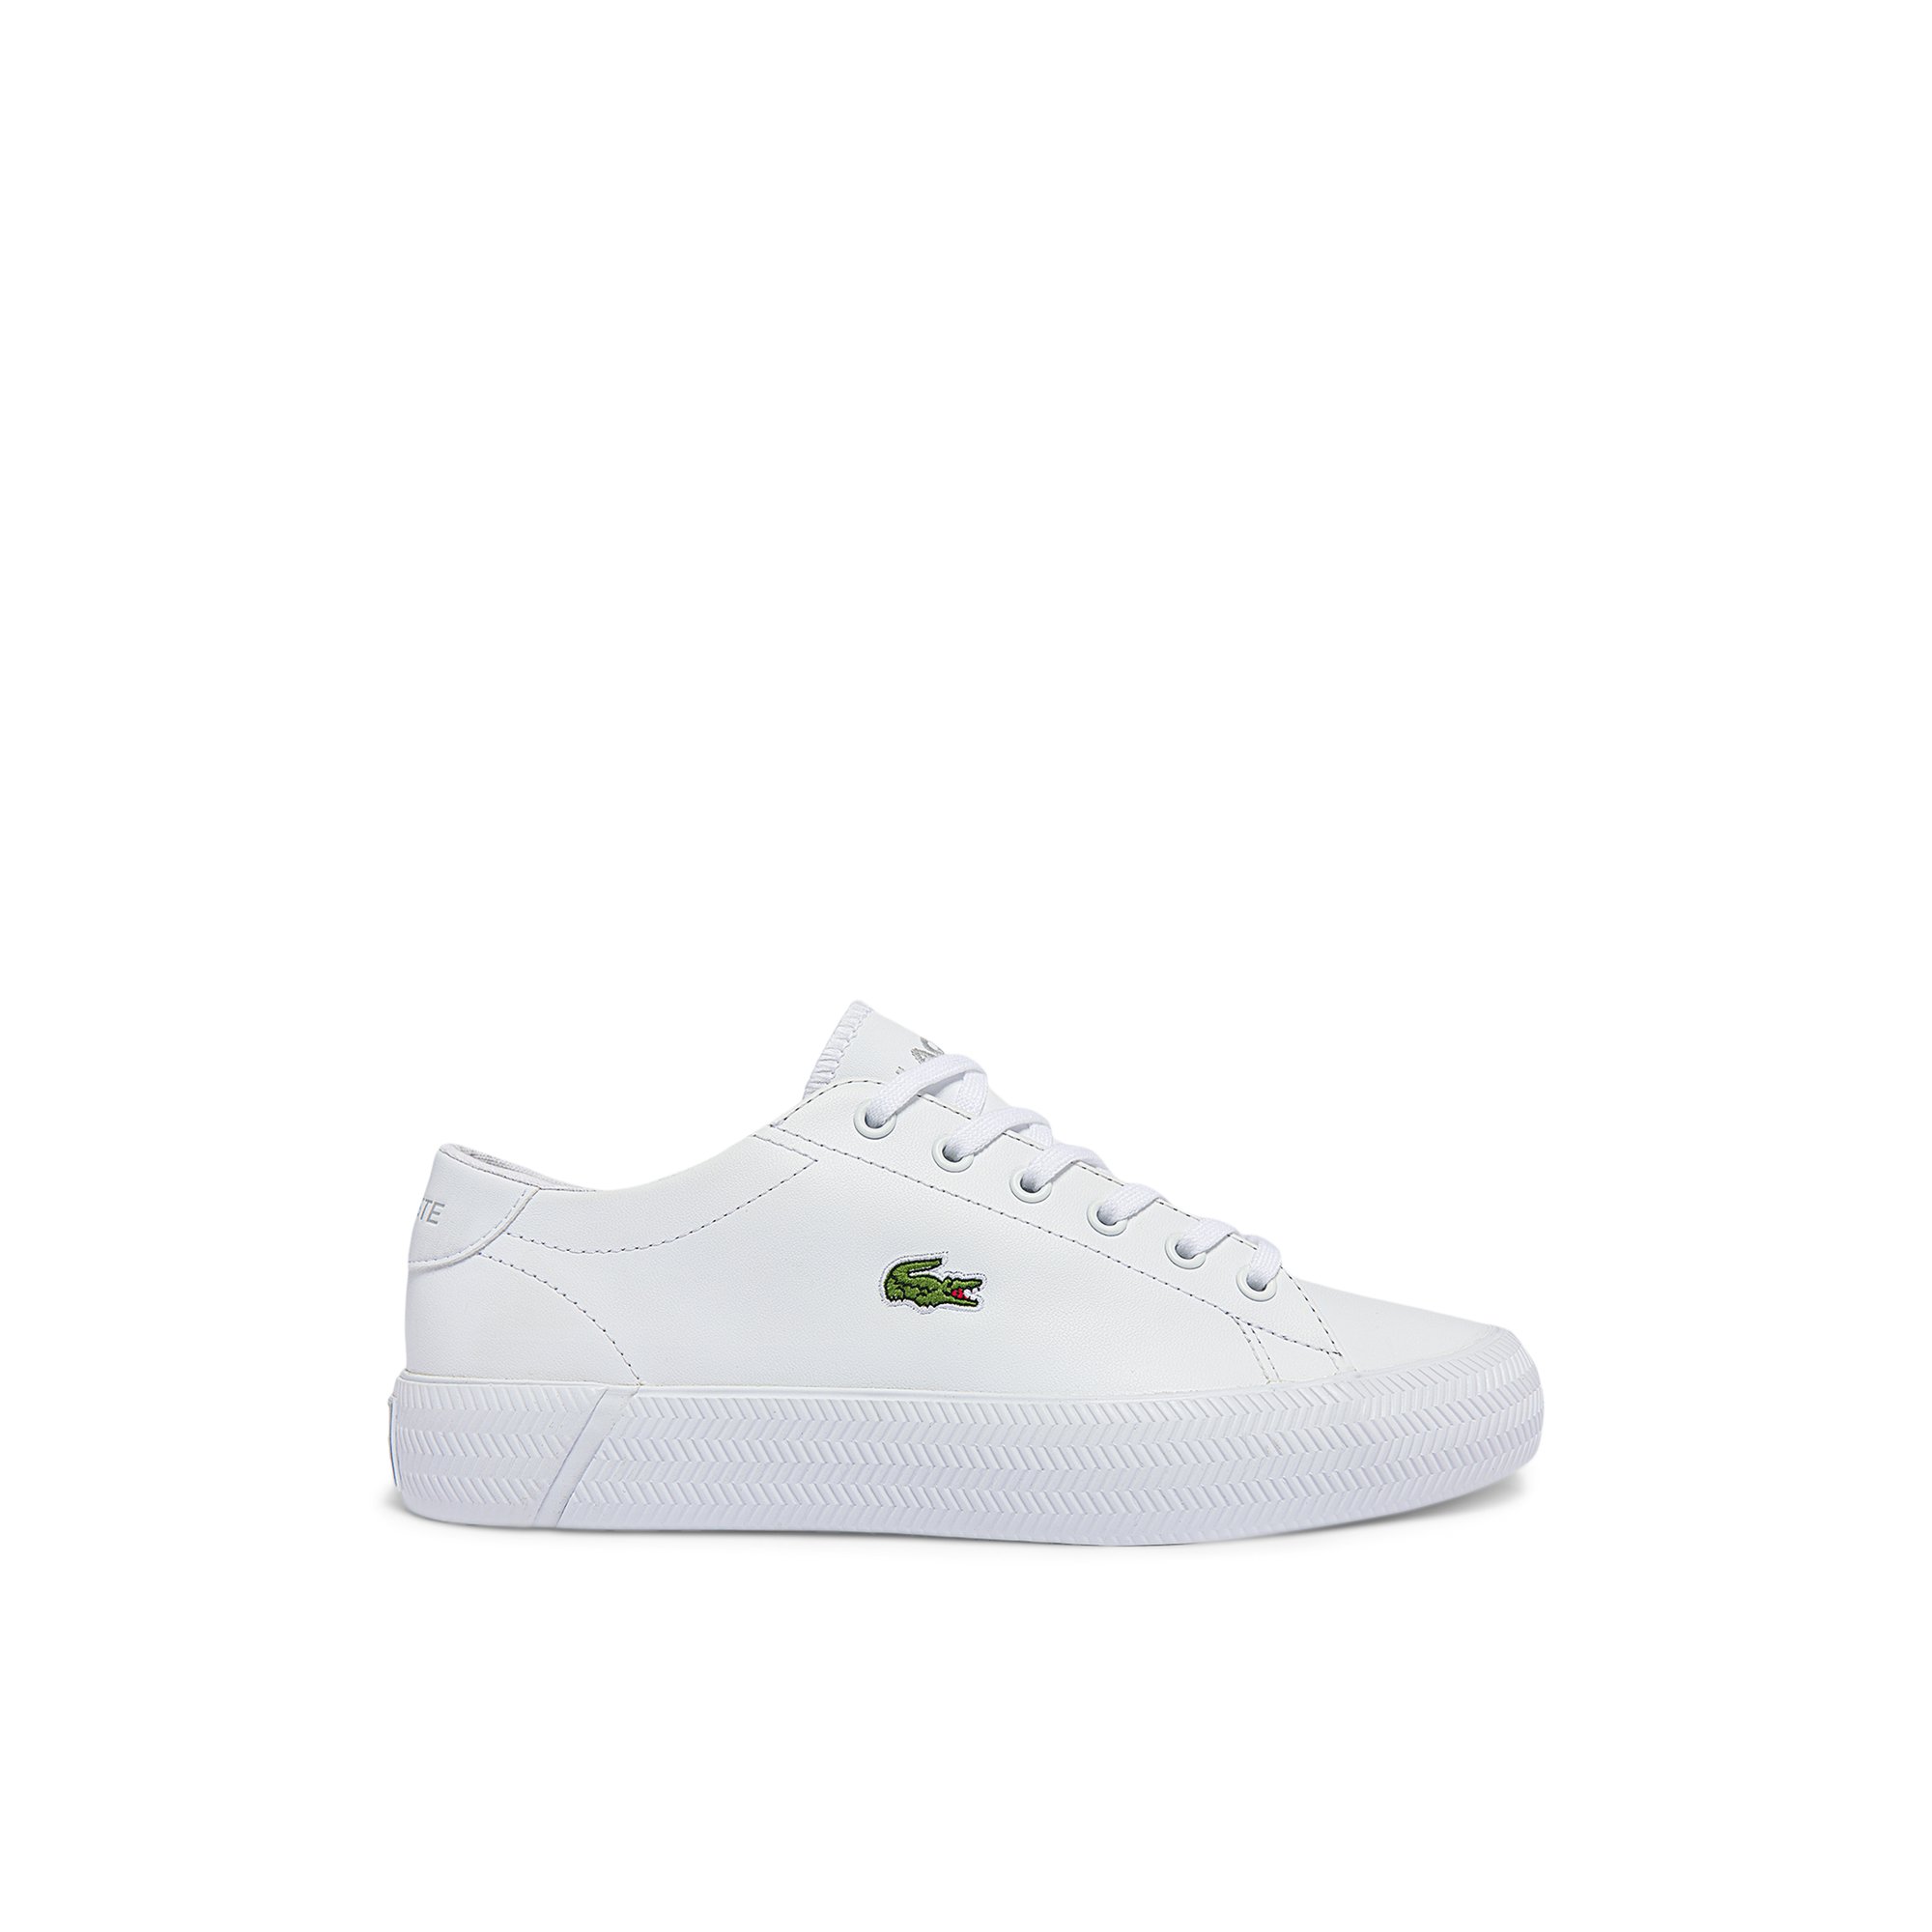 Lacoste Gripshot - Women's White Sneakers